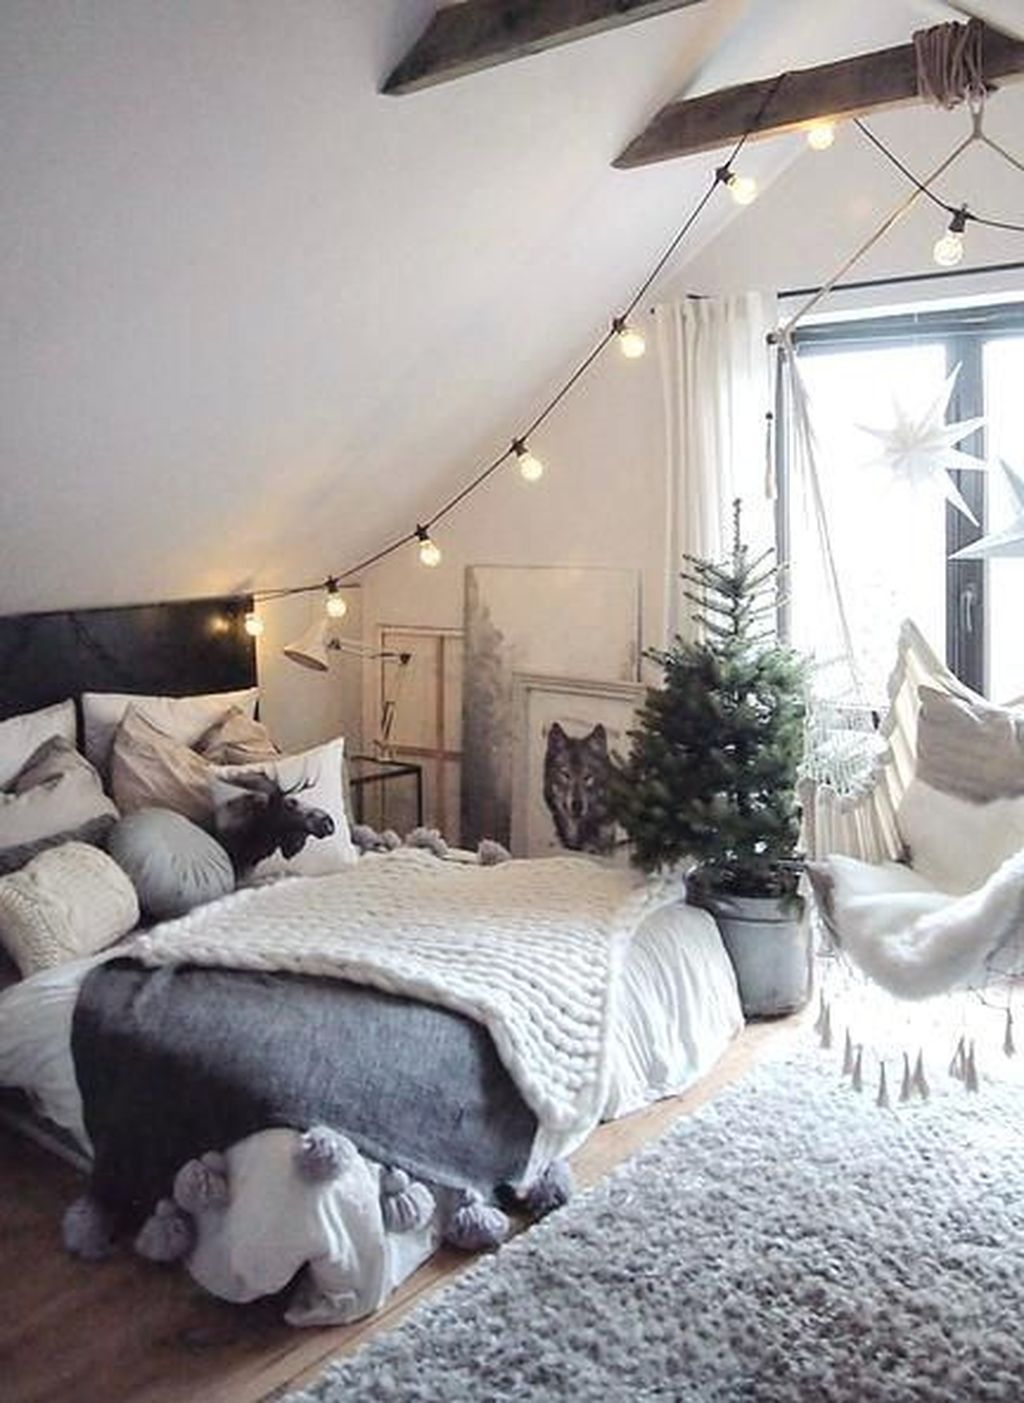 Admiring Bedroom Decor Ideas To Have Right Now 29